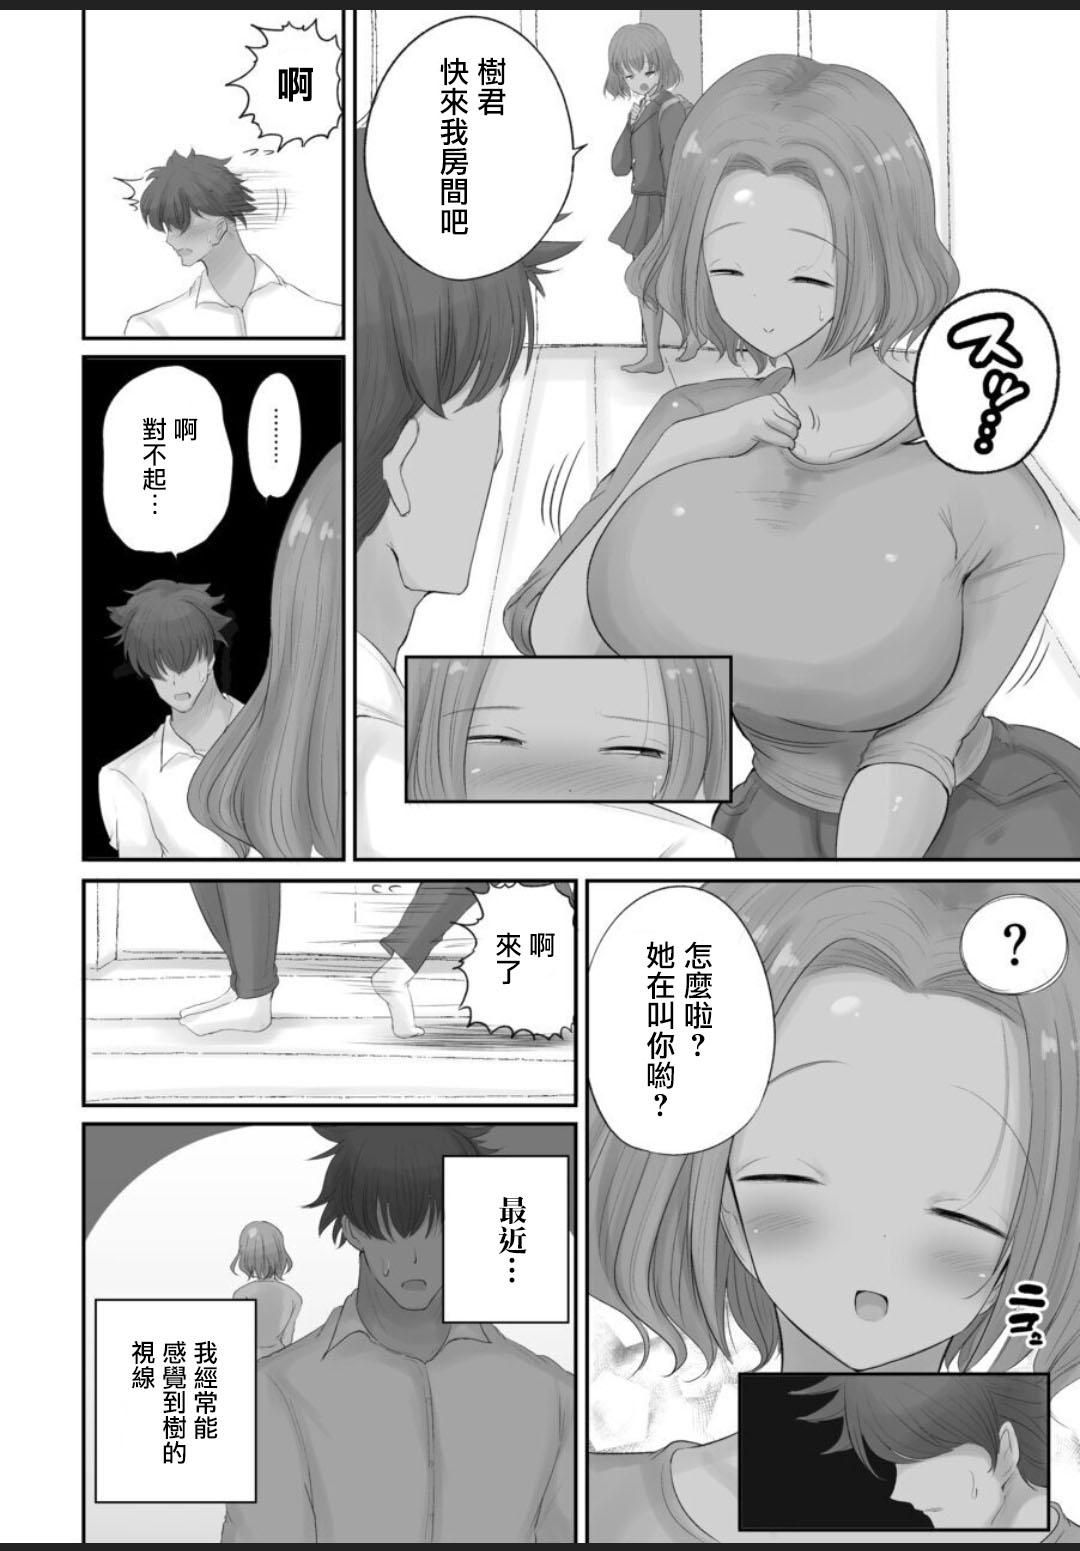 Load 押しに弱い熟女 Amature Sex Tapes - Page 8